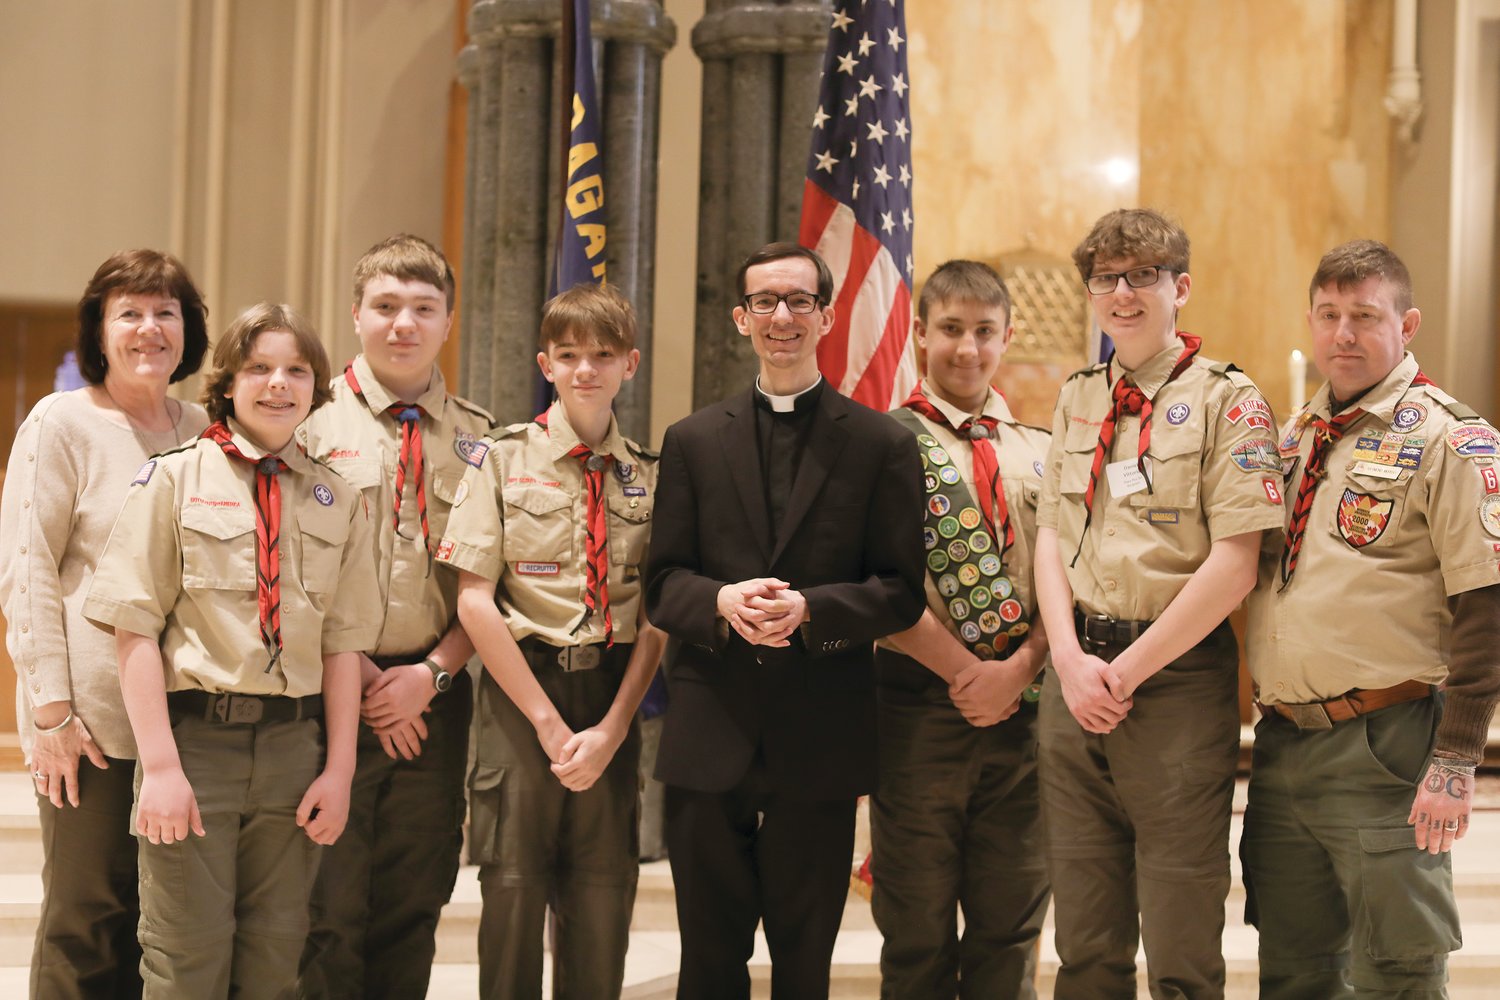 Many were honored at this year’s diocesan Catholic Youth Ministry and Scout Awards, held at the Cathedral of SS. Peter and Paul on Sunday, March 13